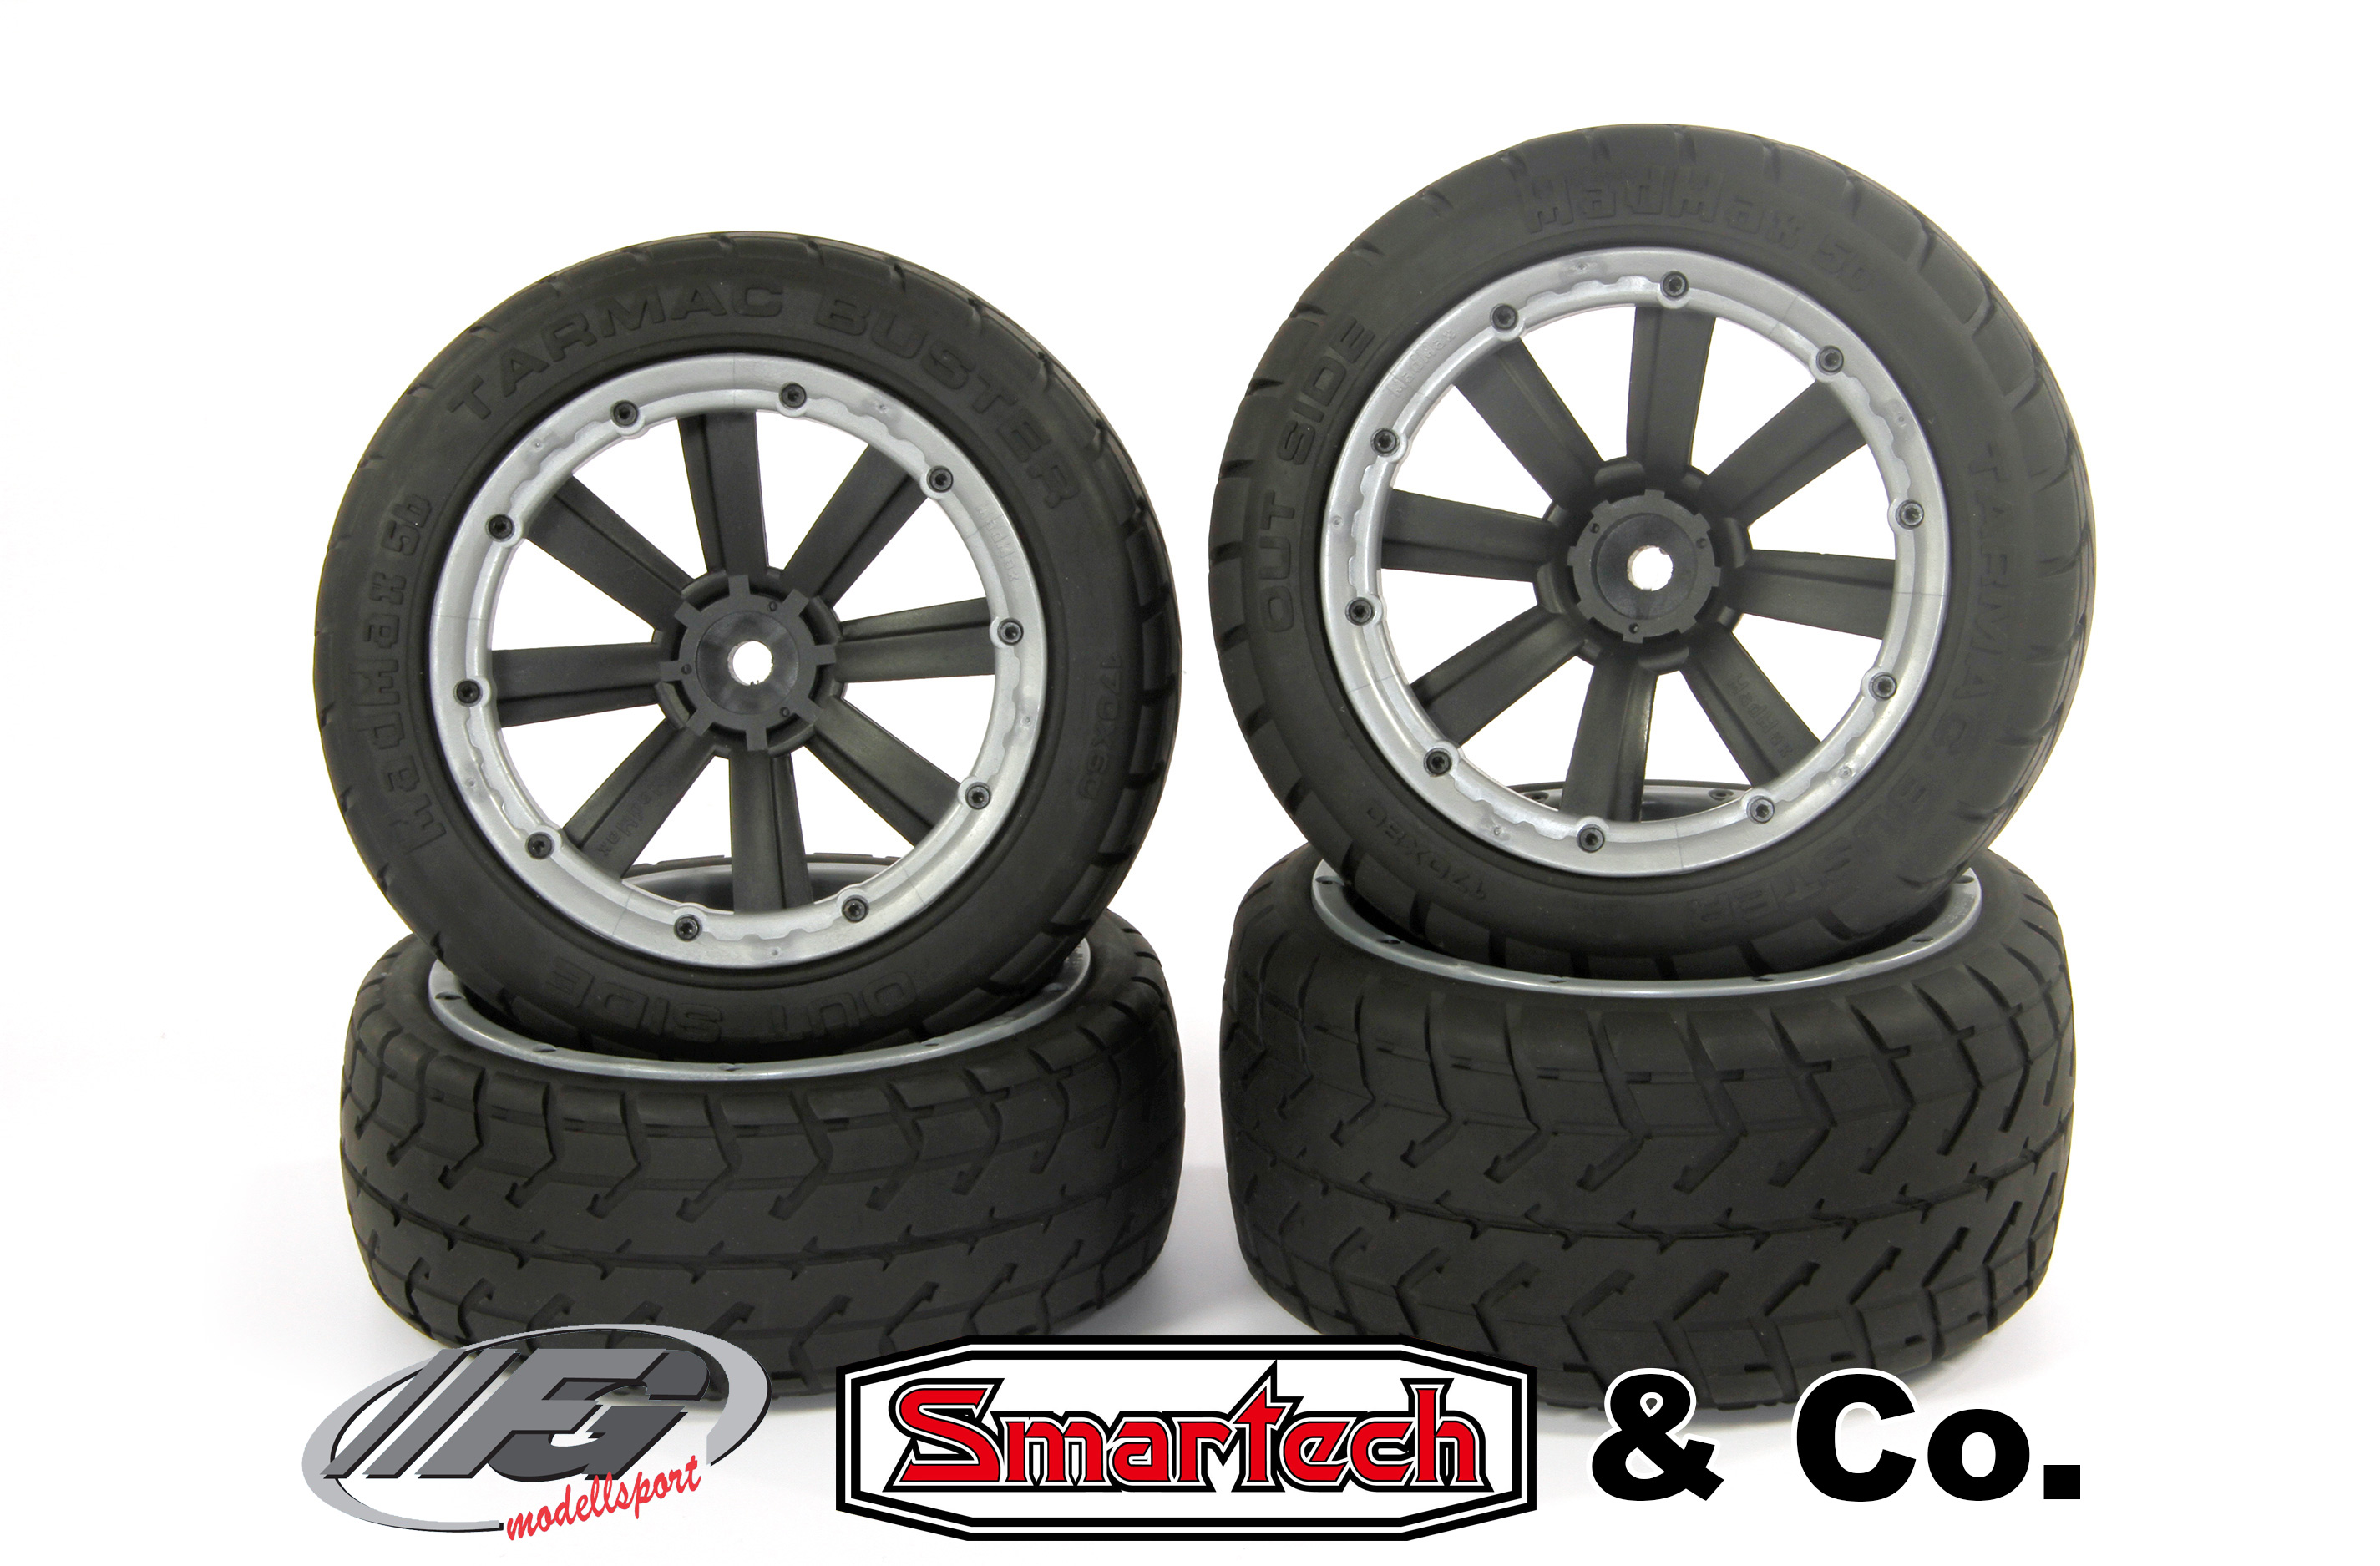 y1400/01 MadMax TARMAC BUSTER 170x80/x60 tires for FG/Smartech and other (18 mm square drive)